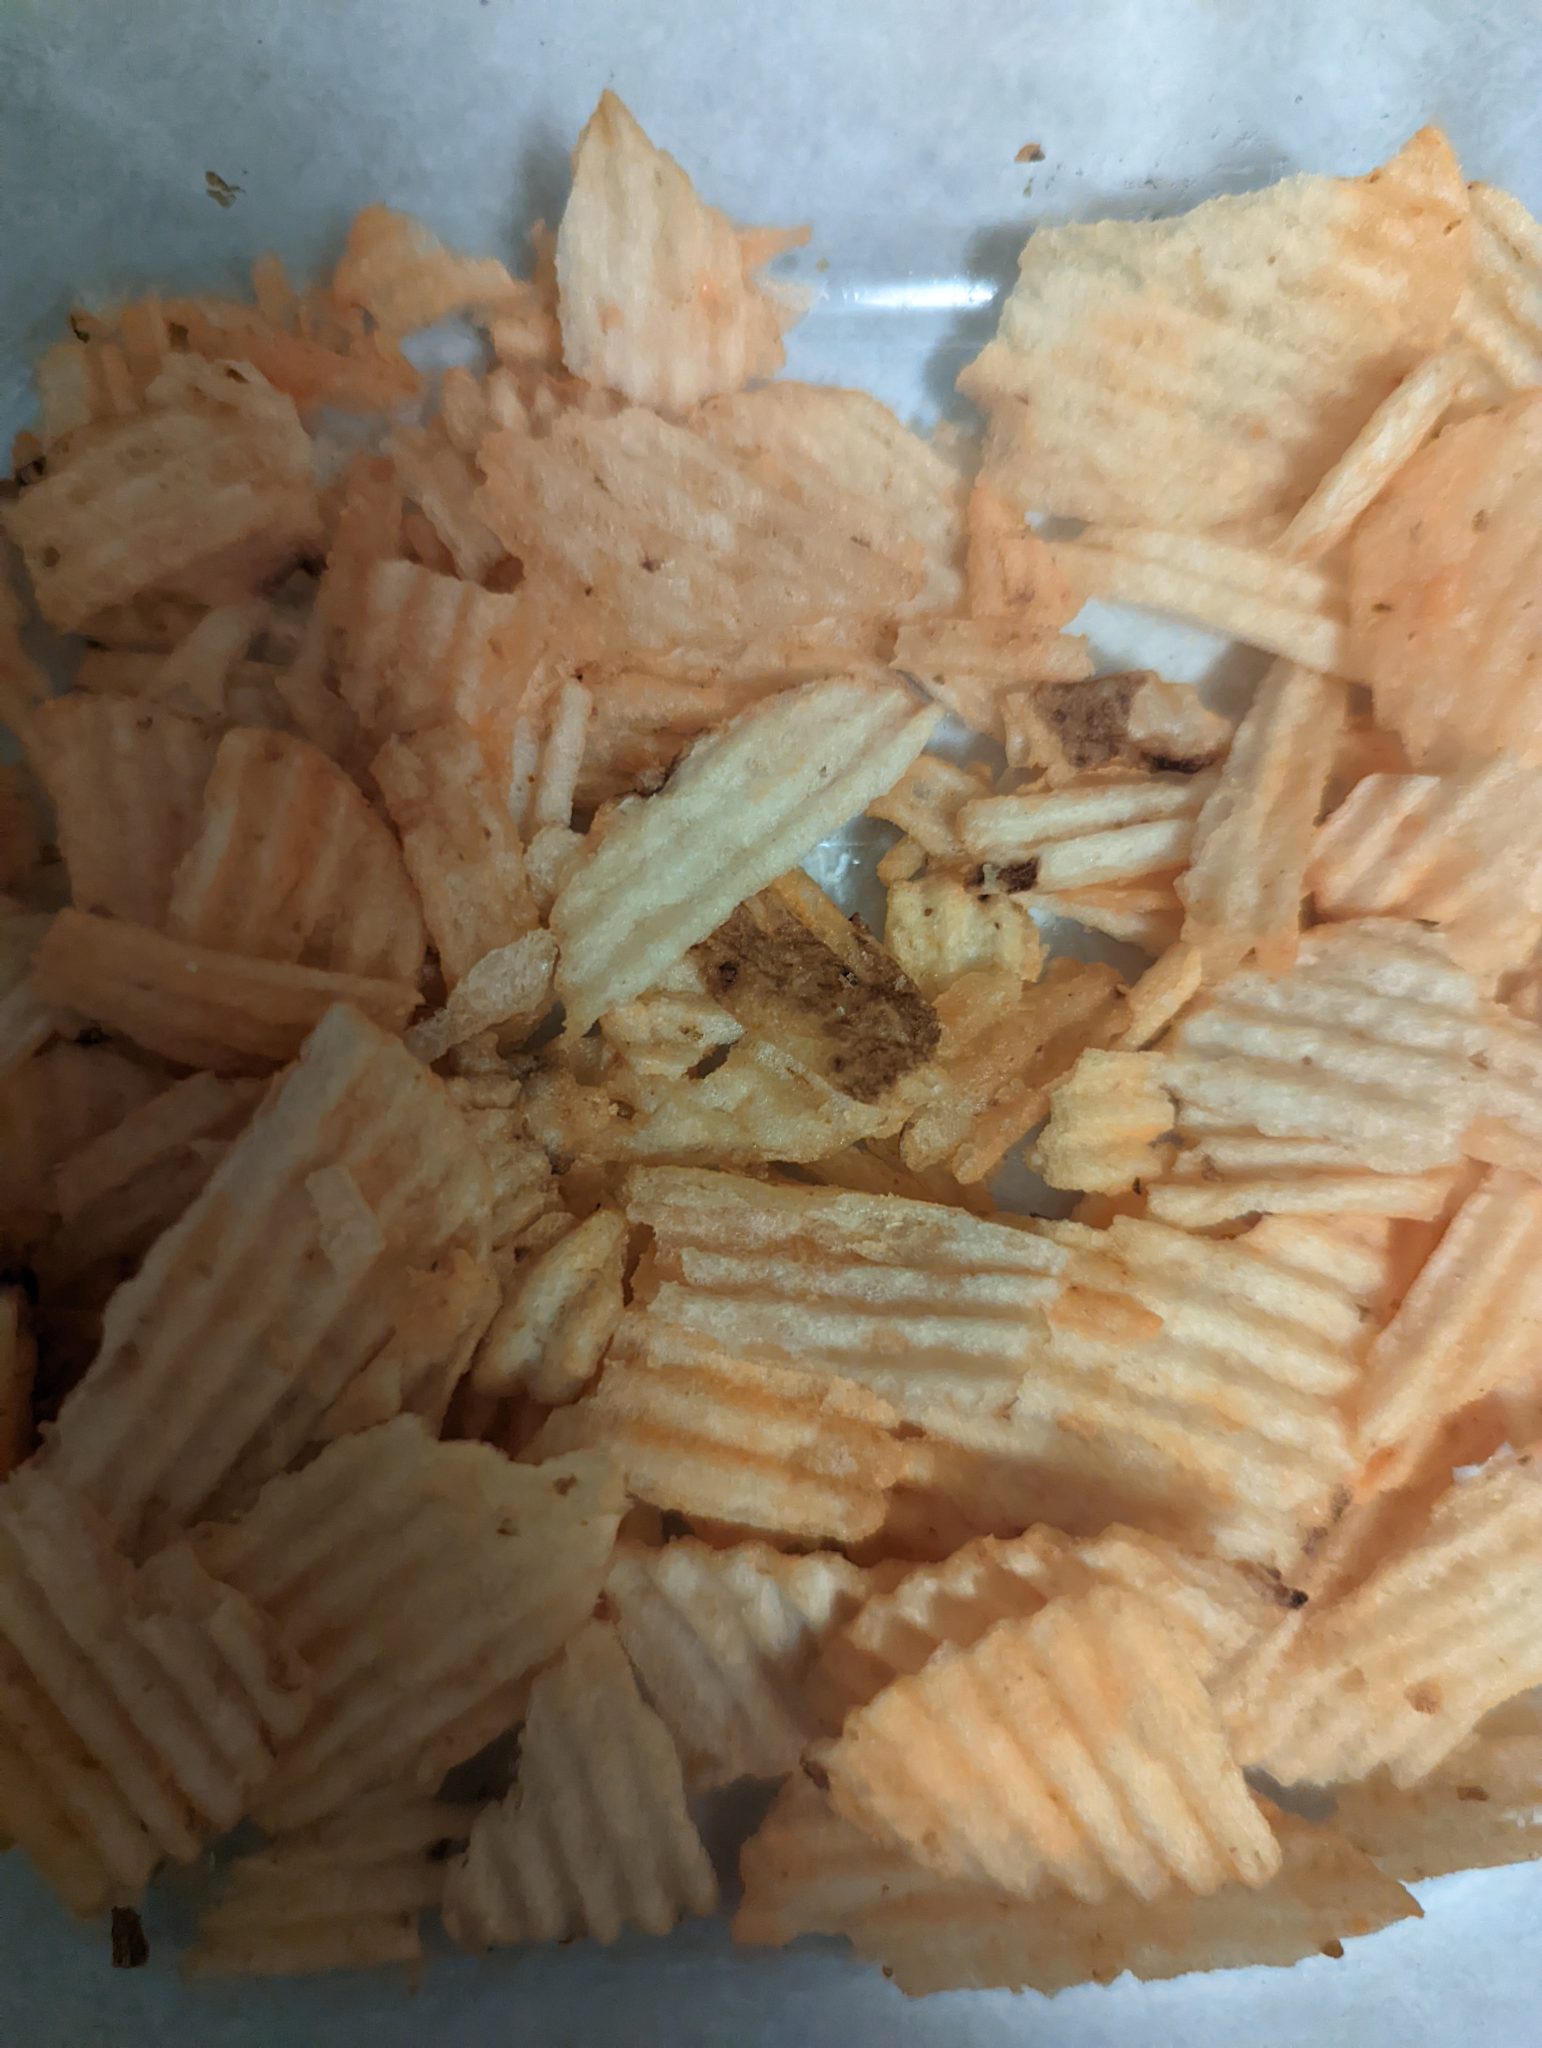 Close up of some potato chips. The chips have ridges.